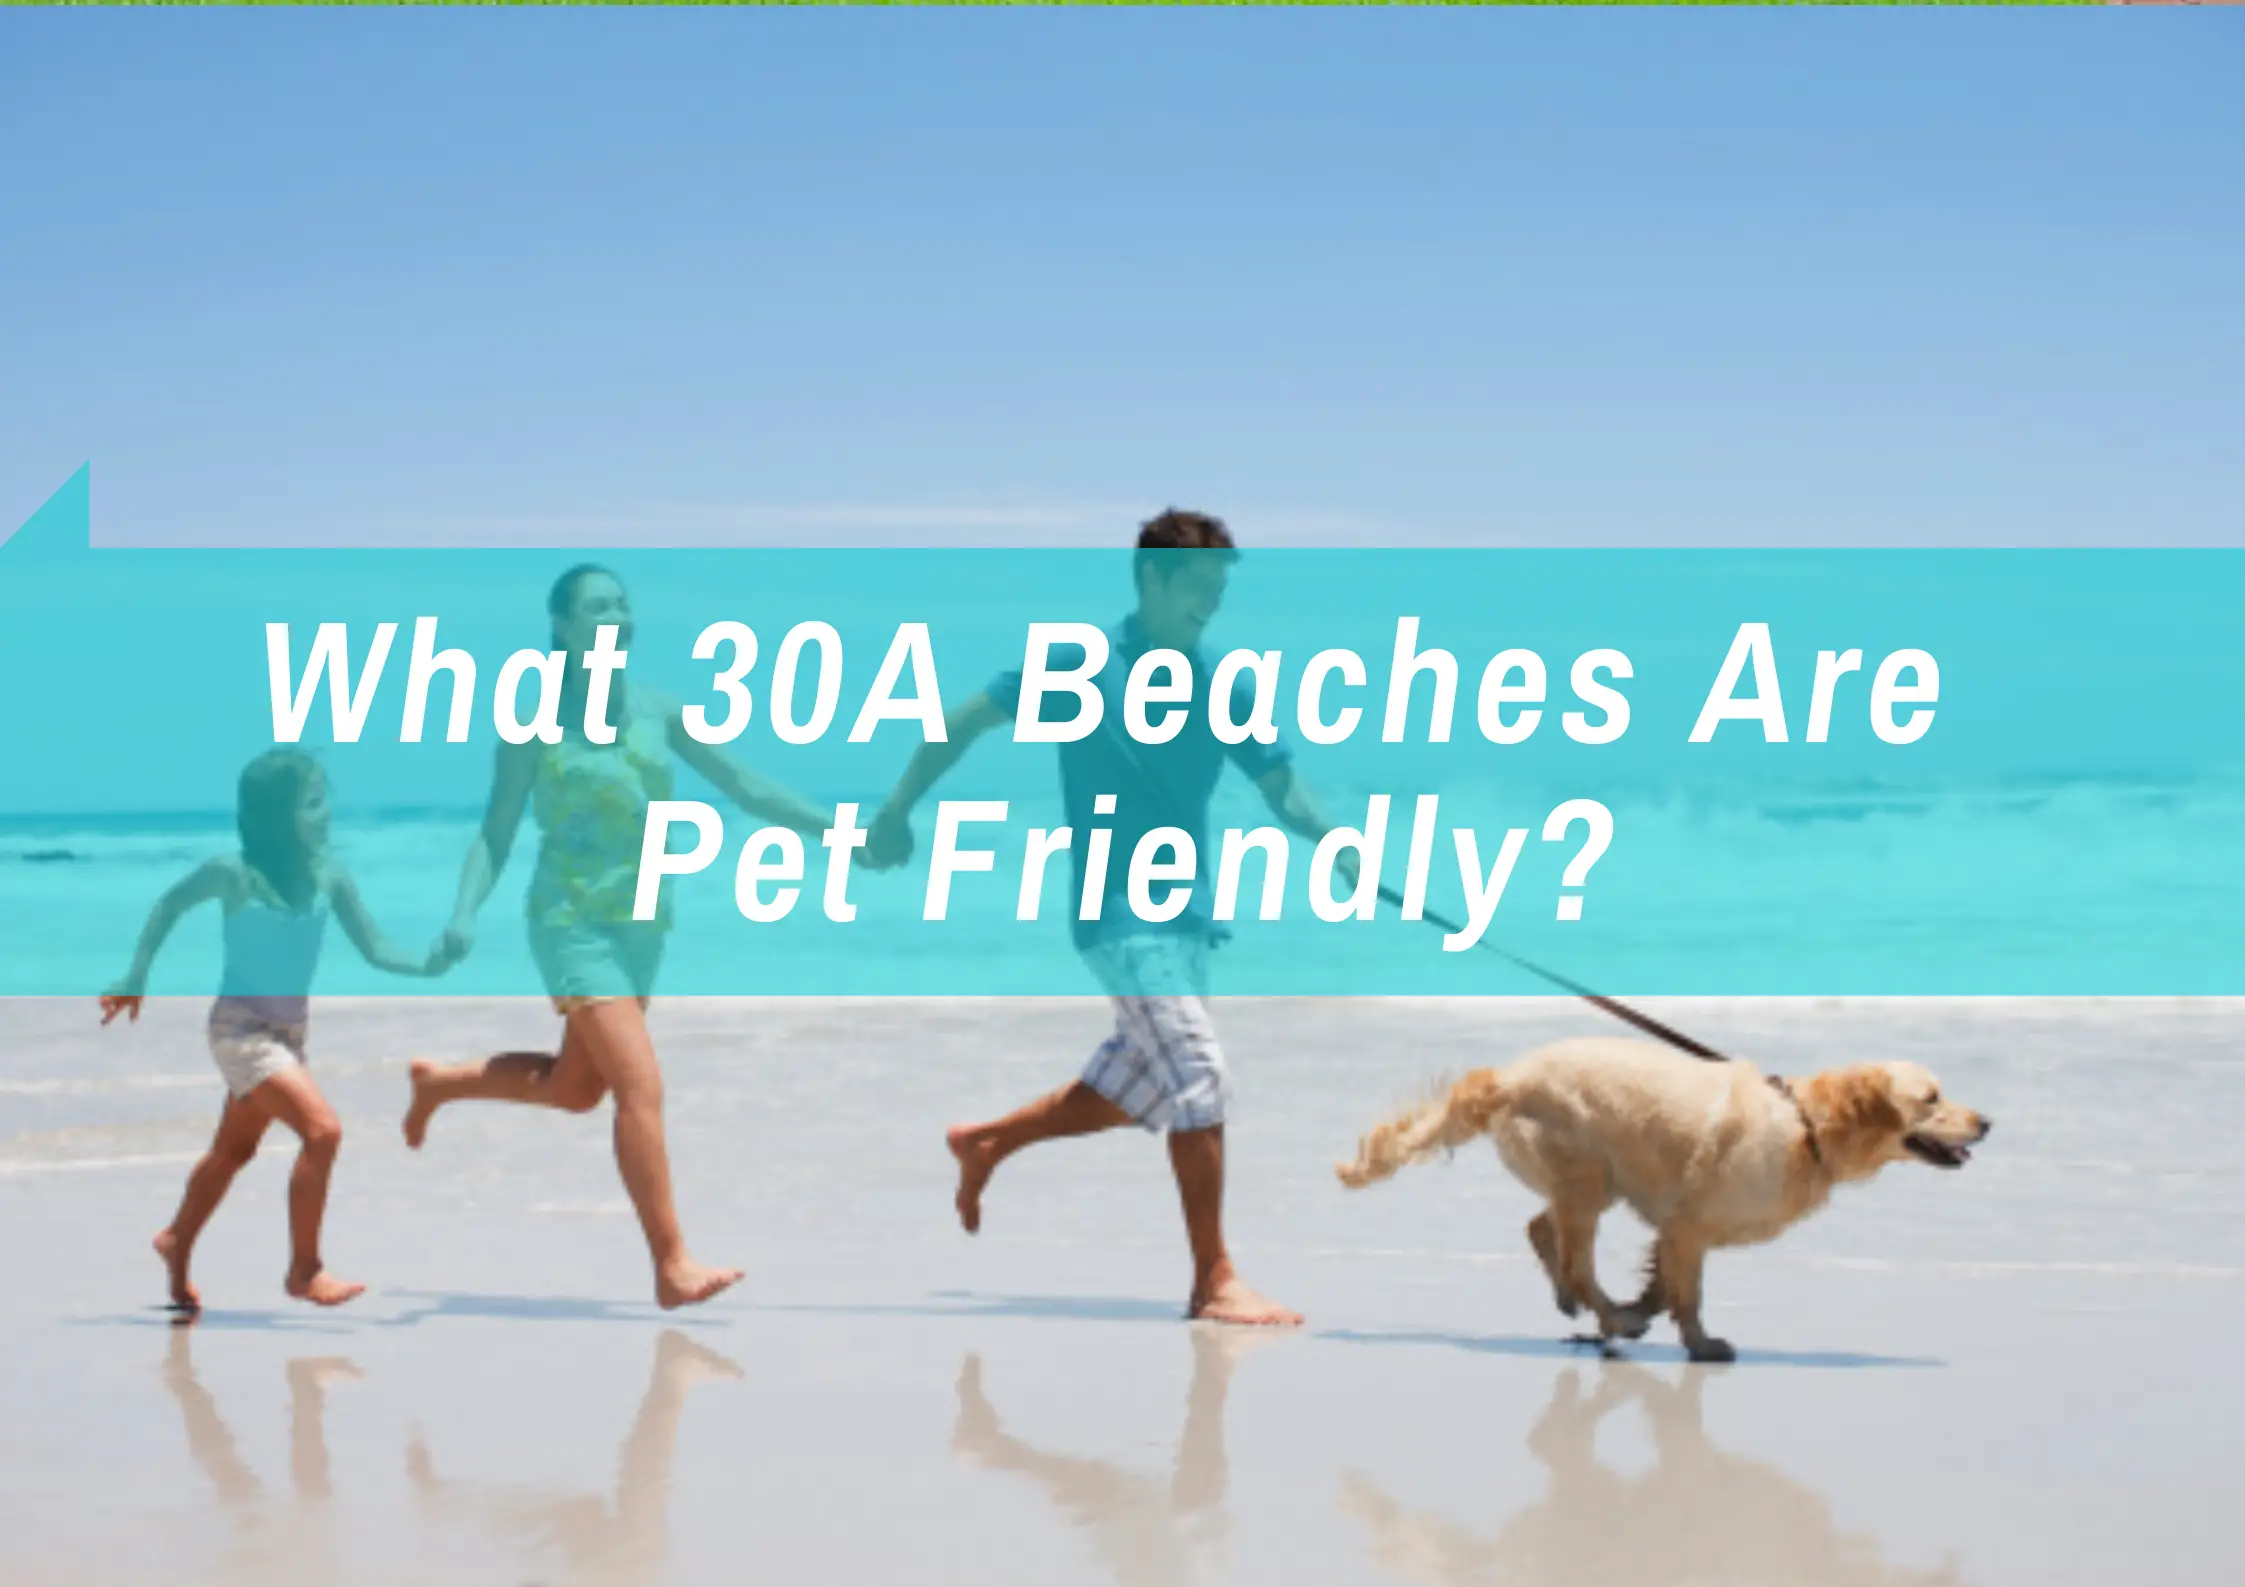 Beaches that pets are allowed to stay